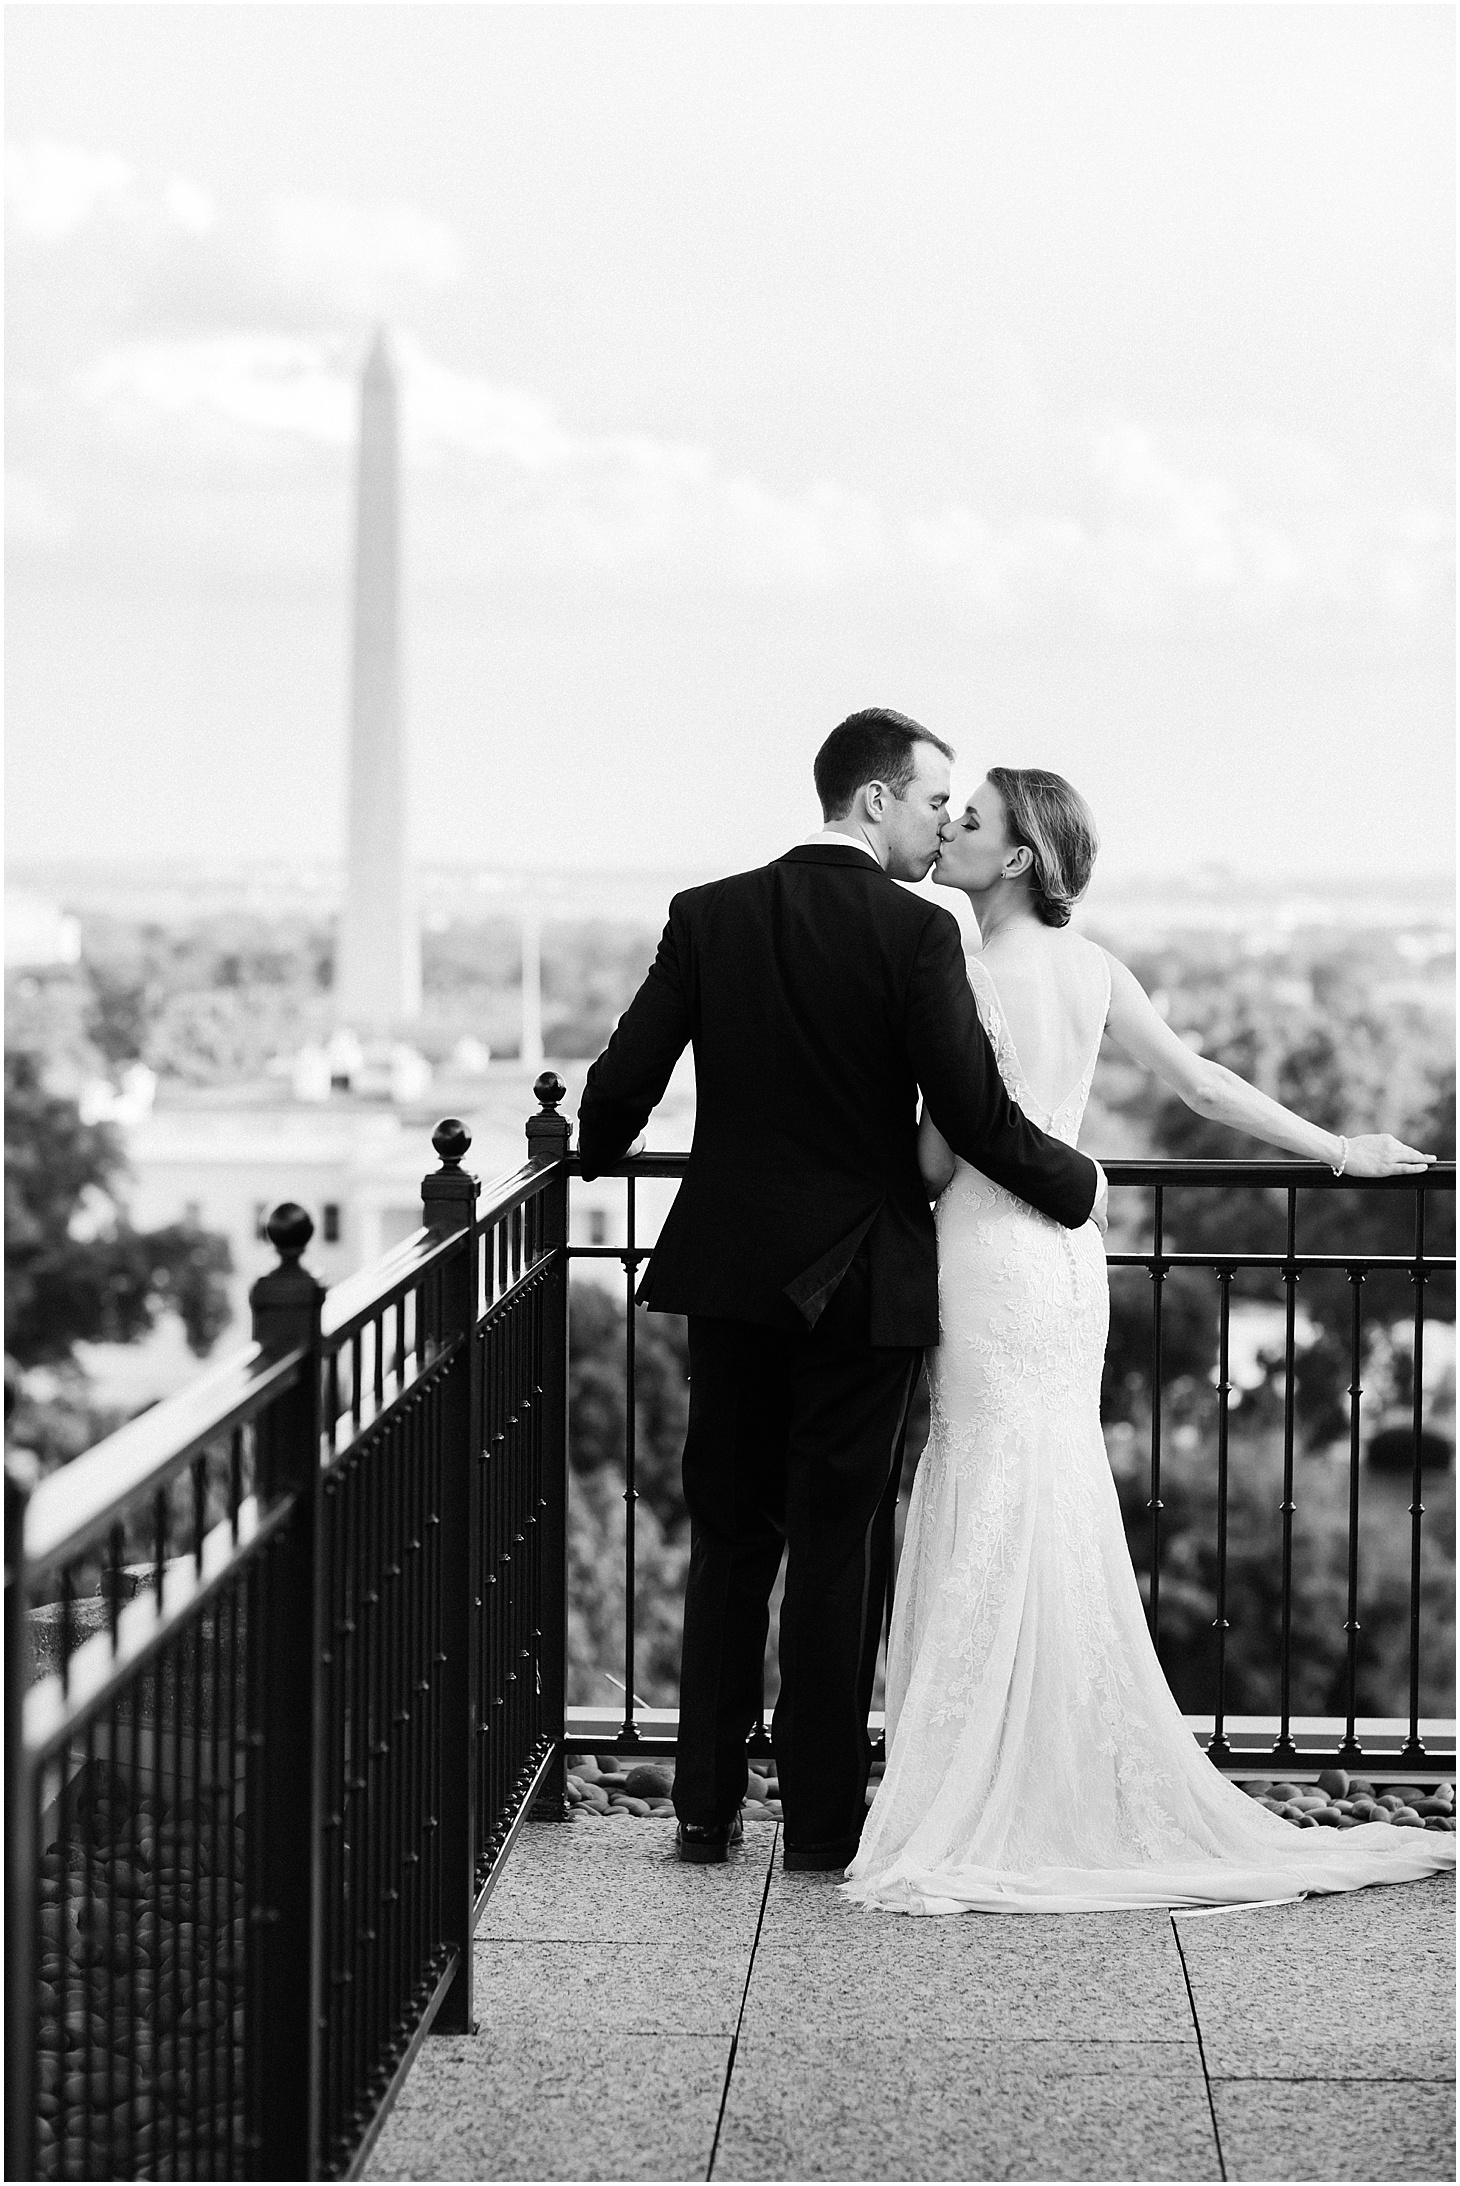 Wedding Portraits Overlooking White House at Hay-Adams Hotel, Black Tie Hay-Adams Wedding with Summer Florals, Ceremony at Capitol Hill Baptist Church, Sarah Bradshaw Photography, DC Wedding Photographer